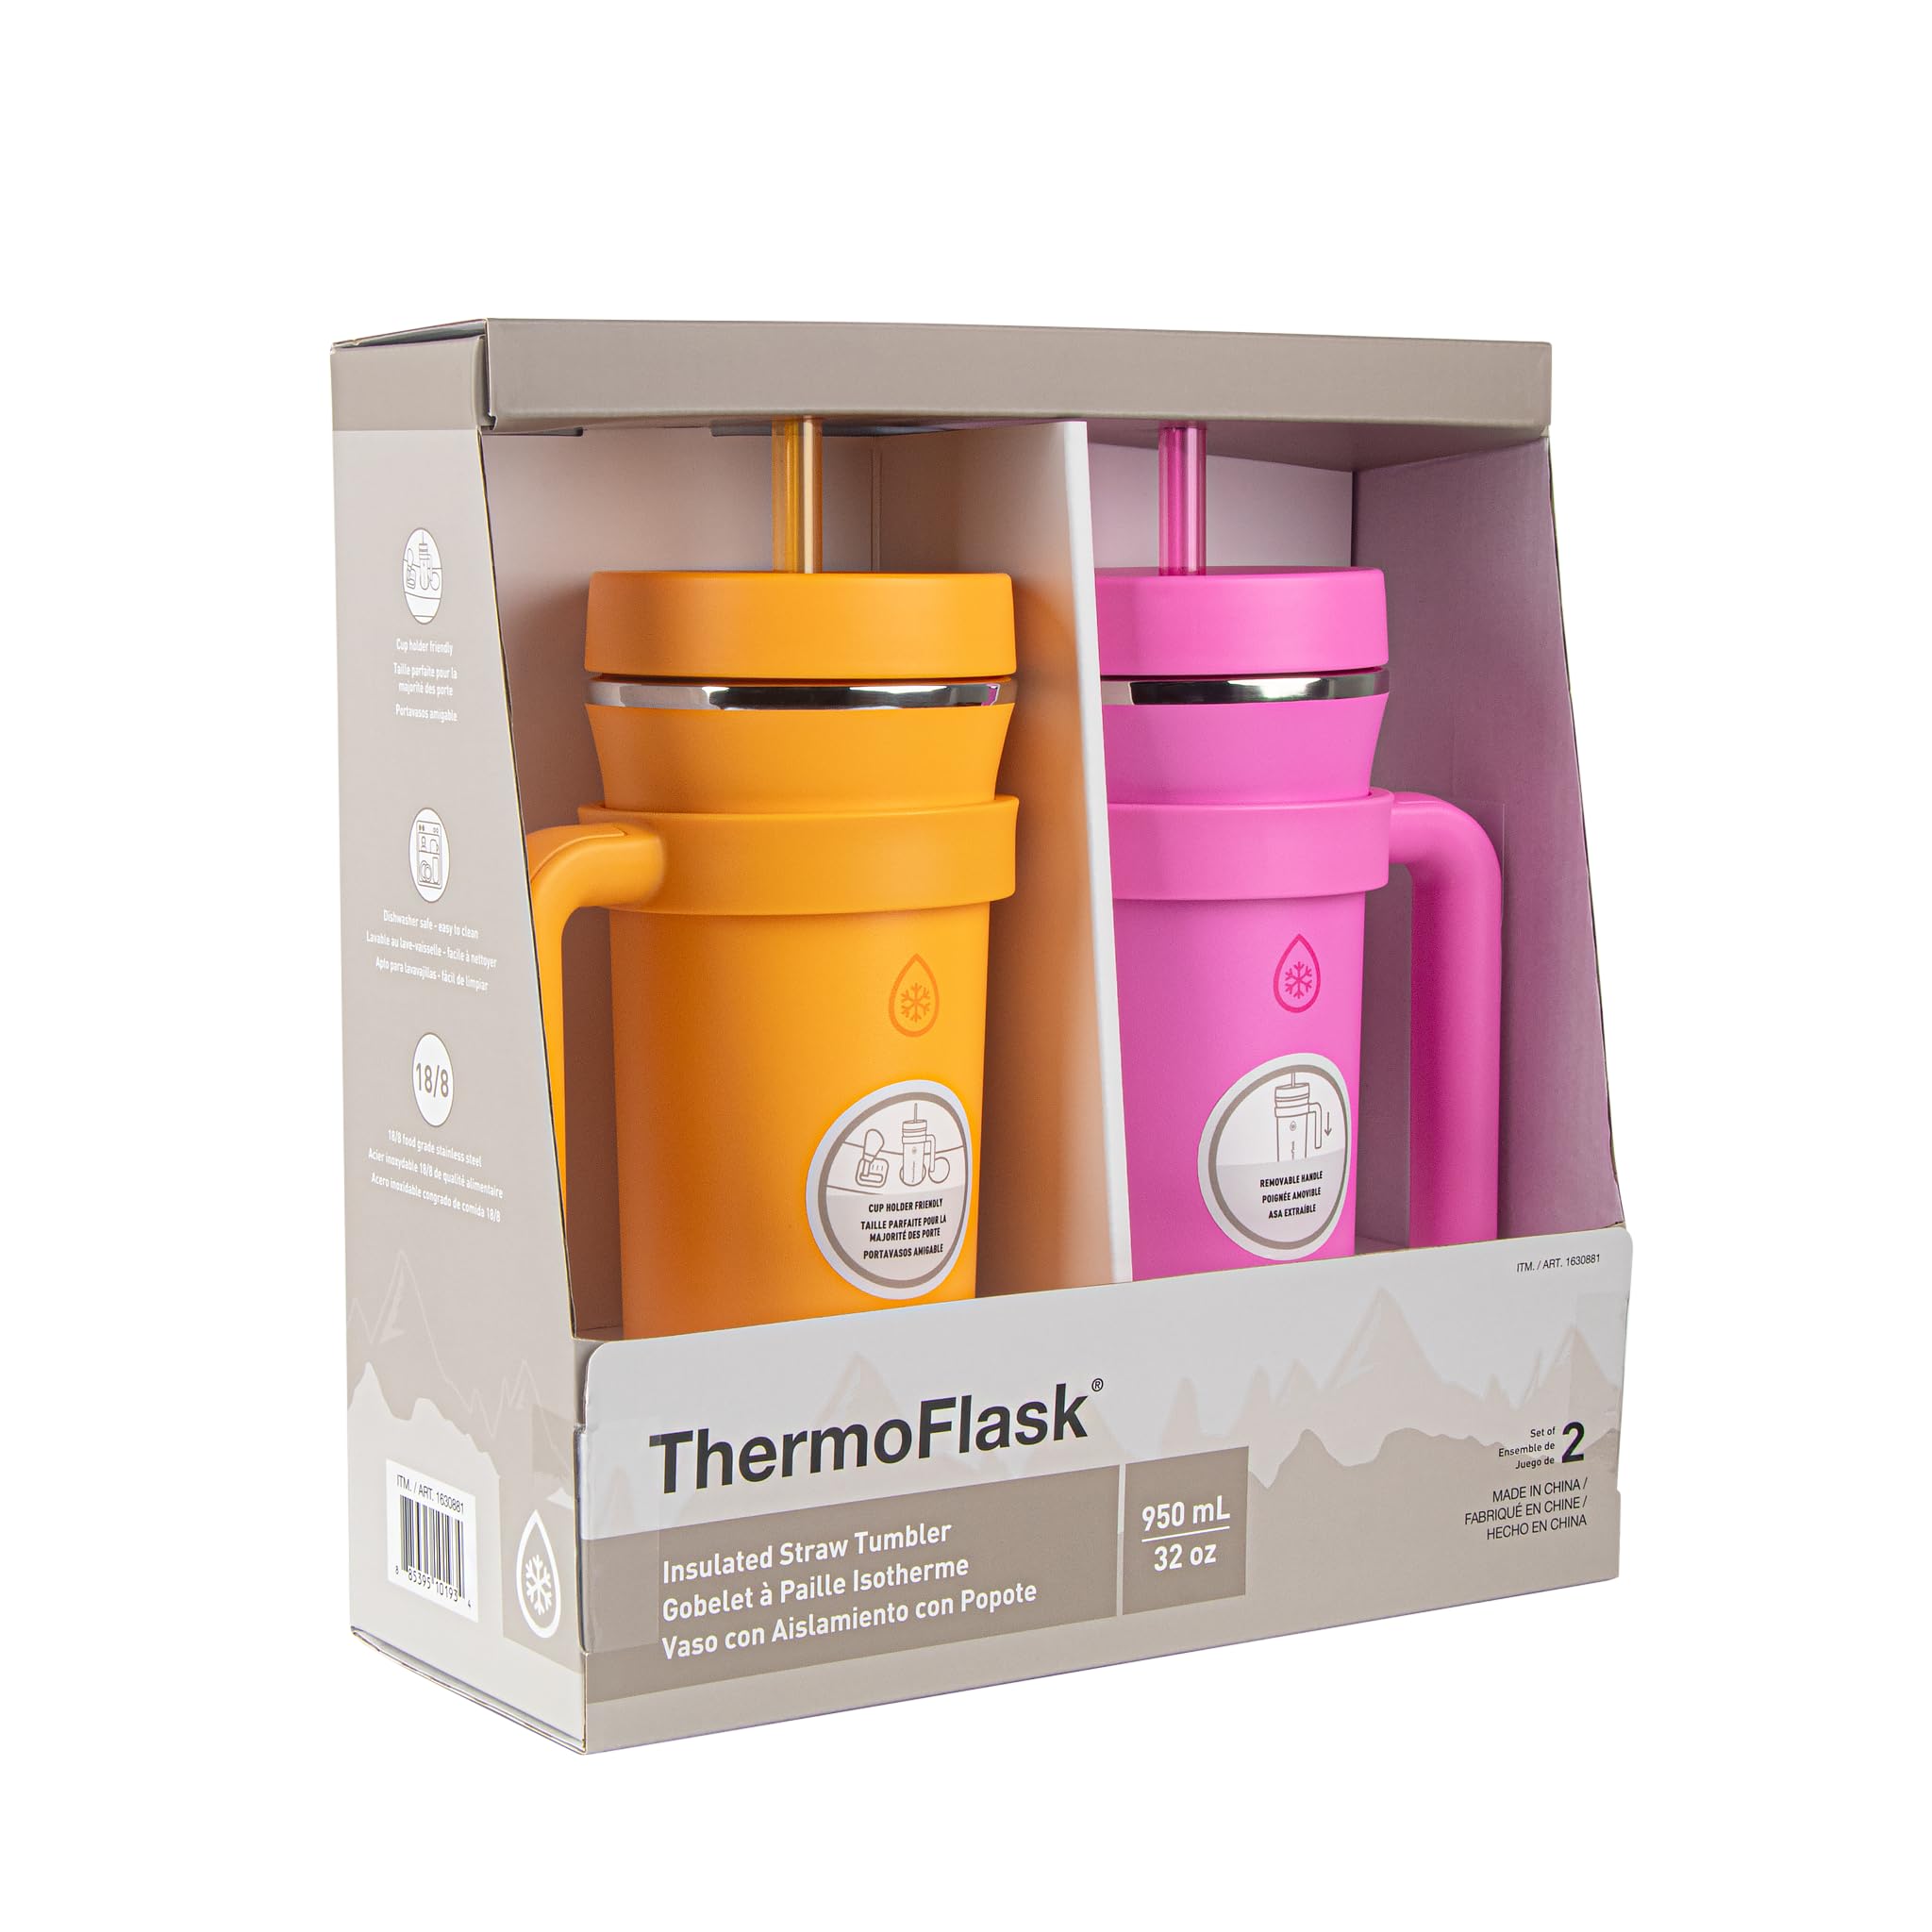 ThermoFlask Premium Quality Double Wall Insulated Stainless Steel Tumbler with Handle and Straw Lid, 32 Ounce, 2-Pack, Honeycomb/Hot Pink